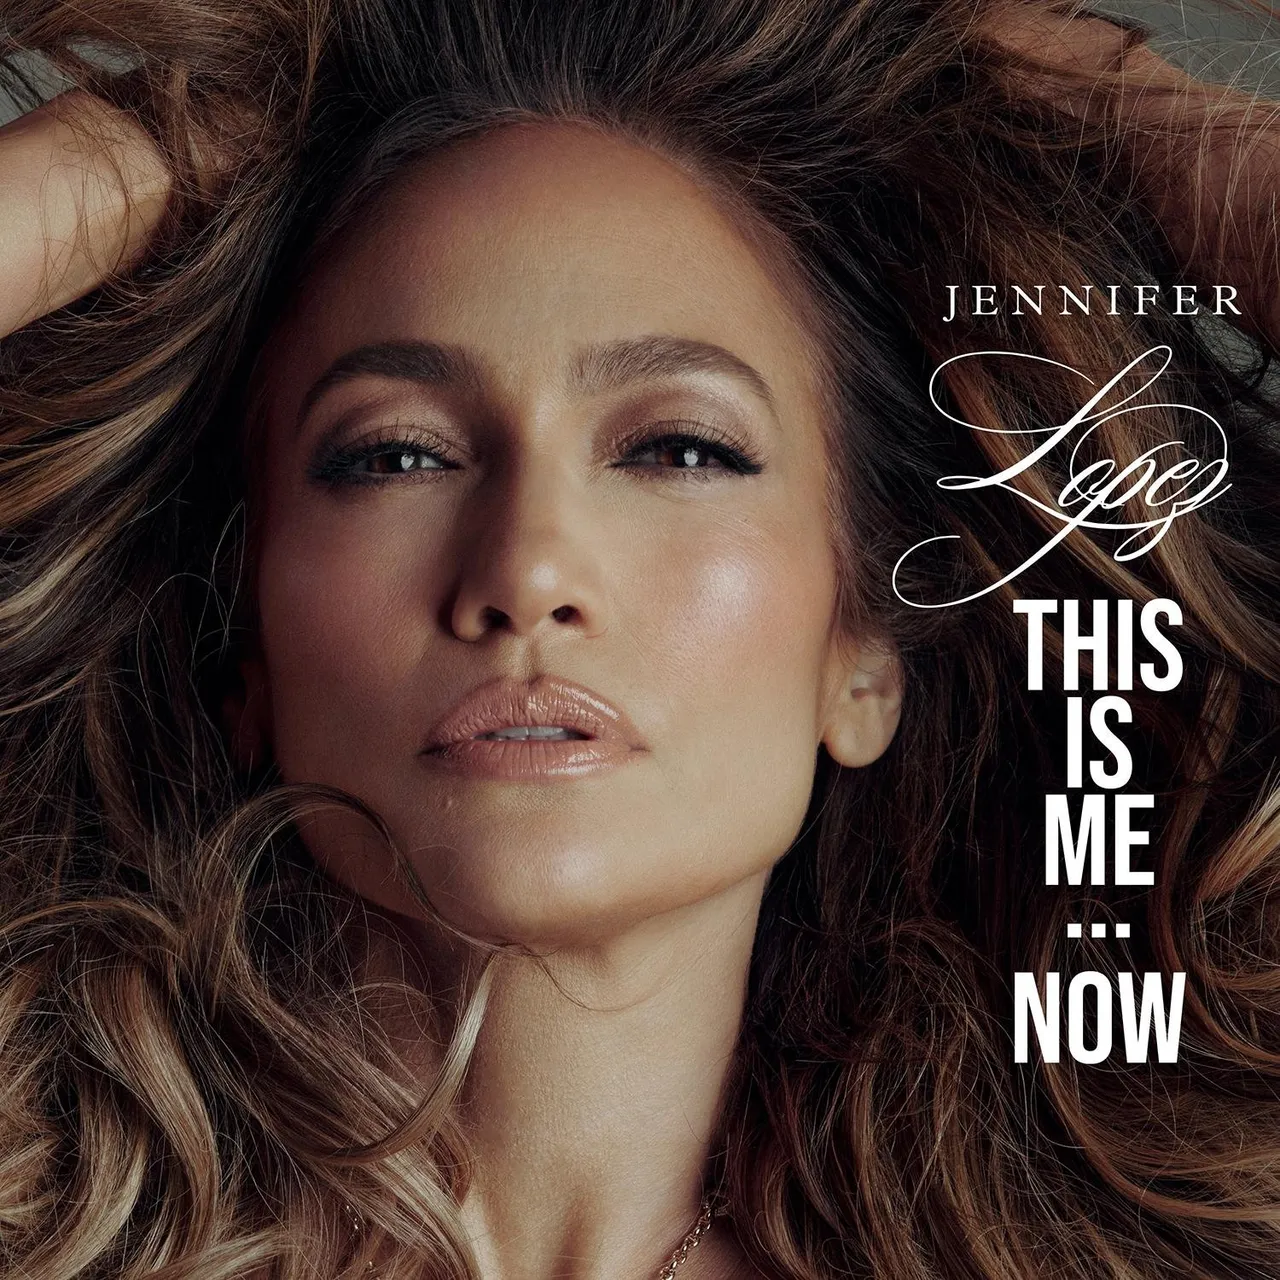 US: Jennifer Lopez This Is Me… Now makes chart debut around the world